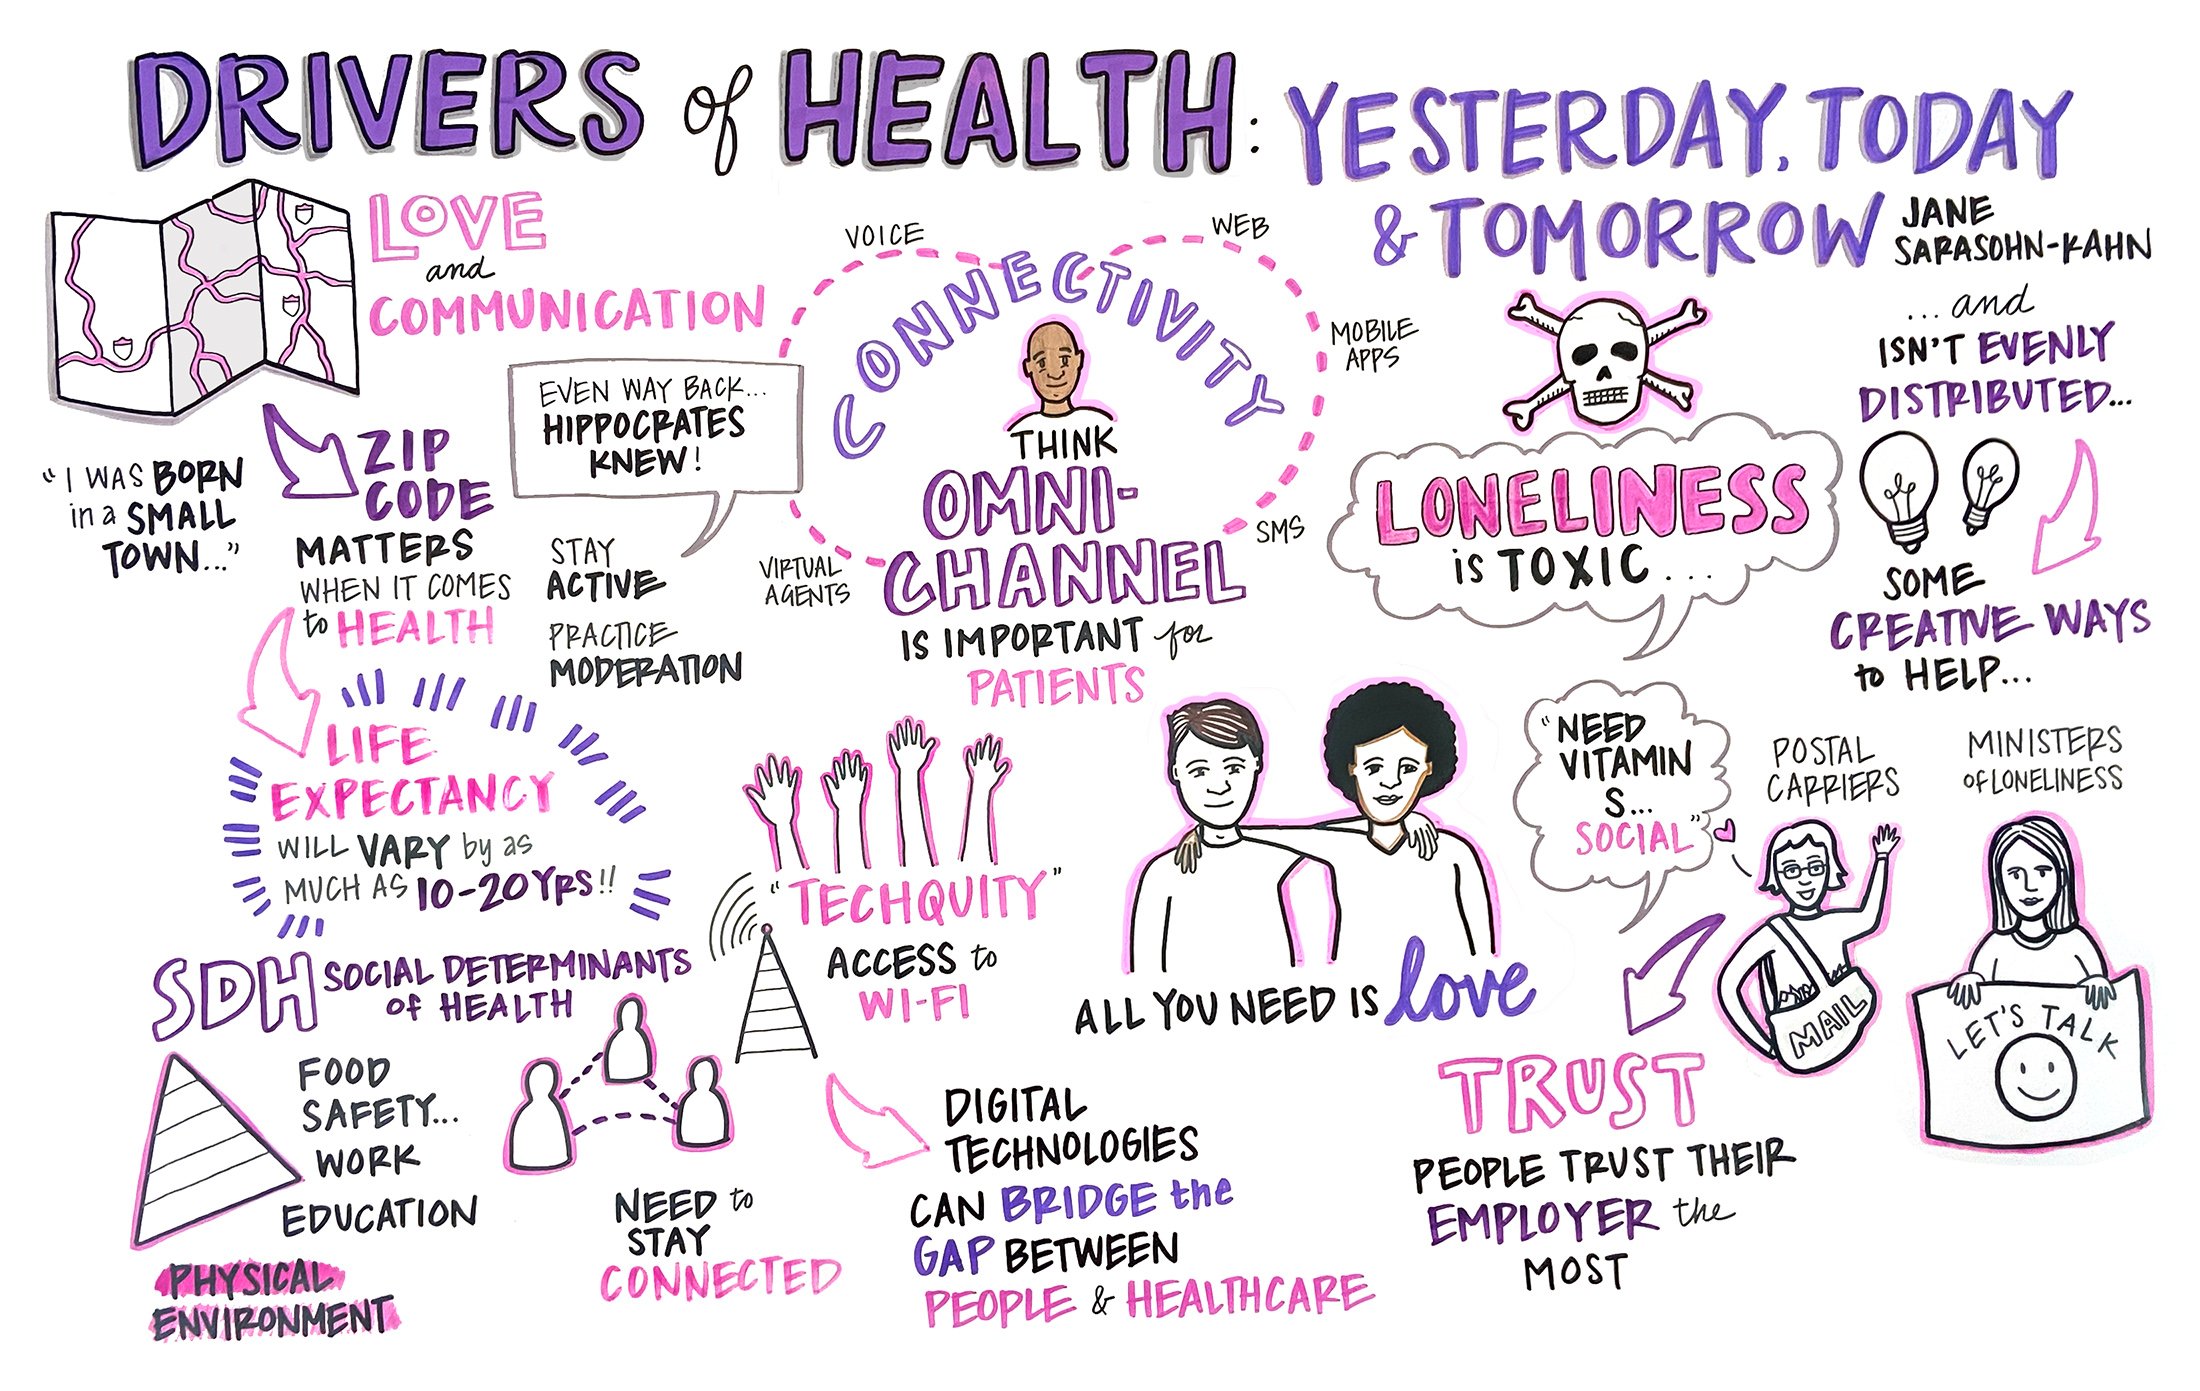 Drivers of Health: Yesterday, Today & Tomorrow  